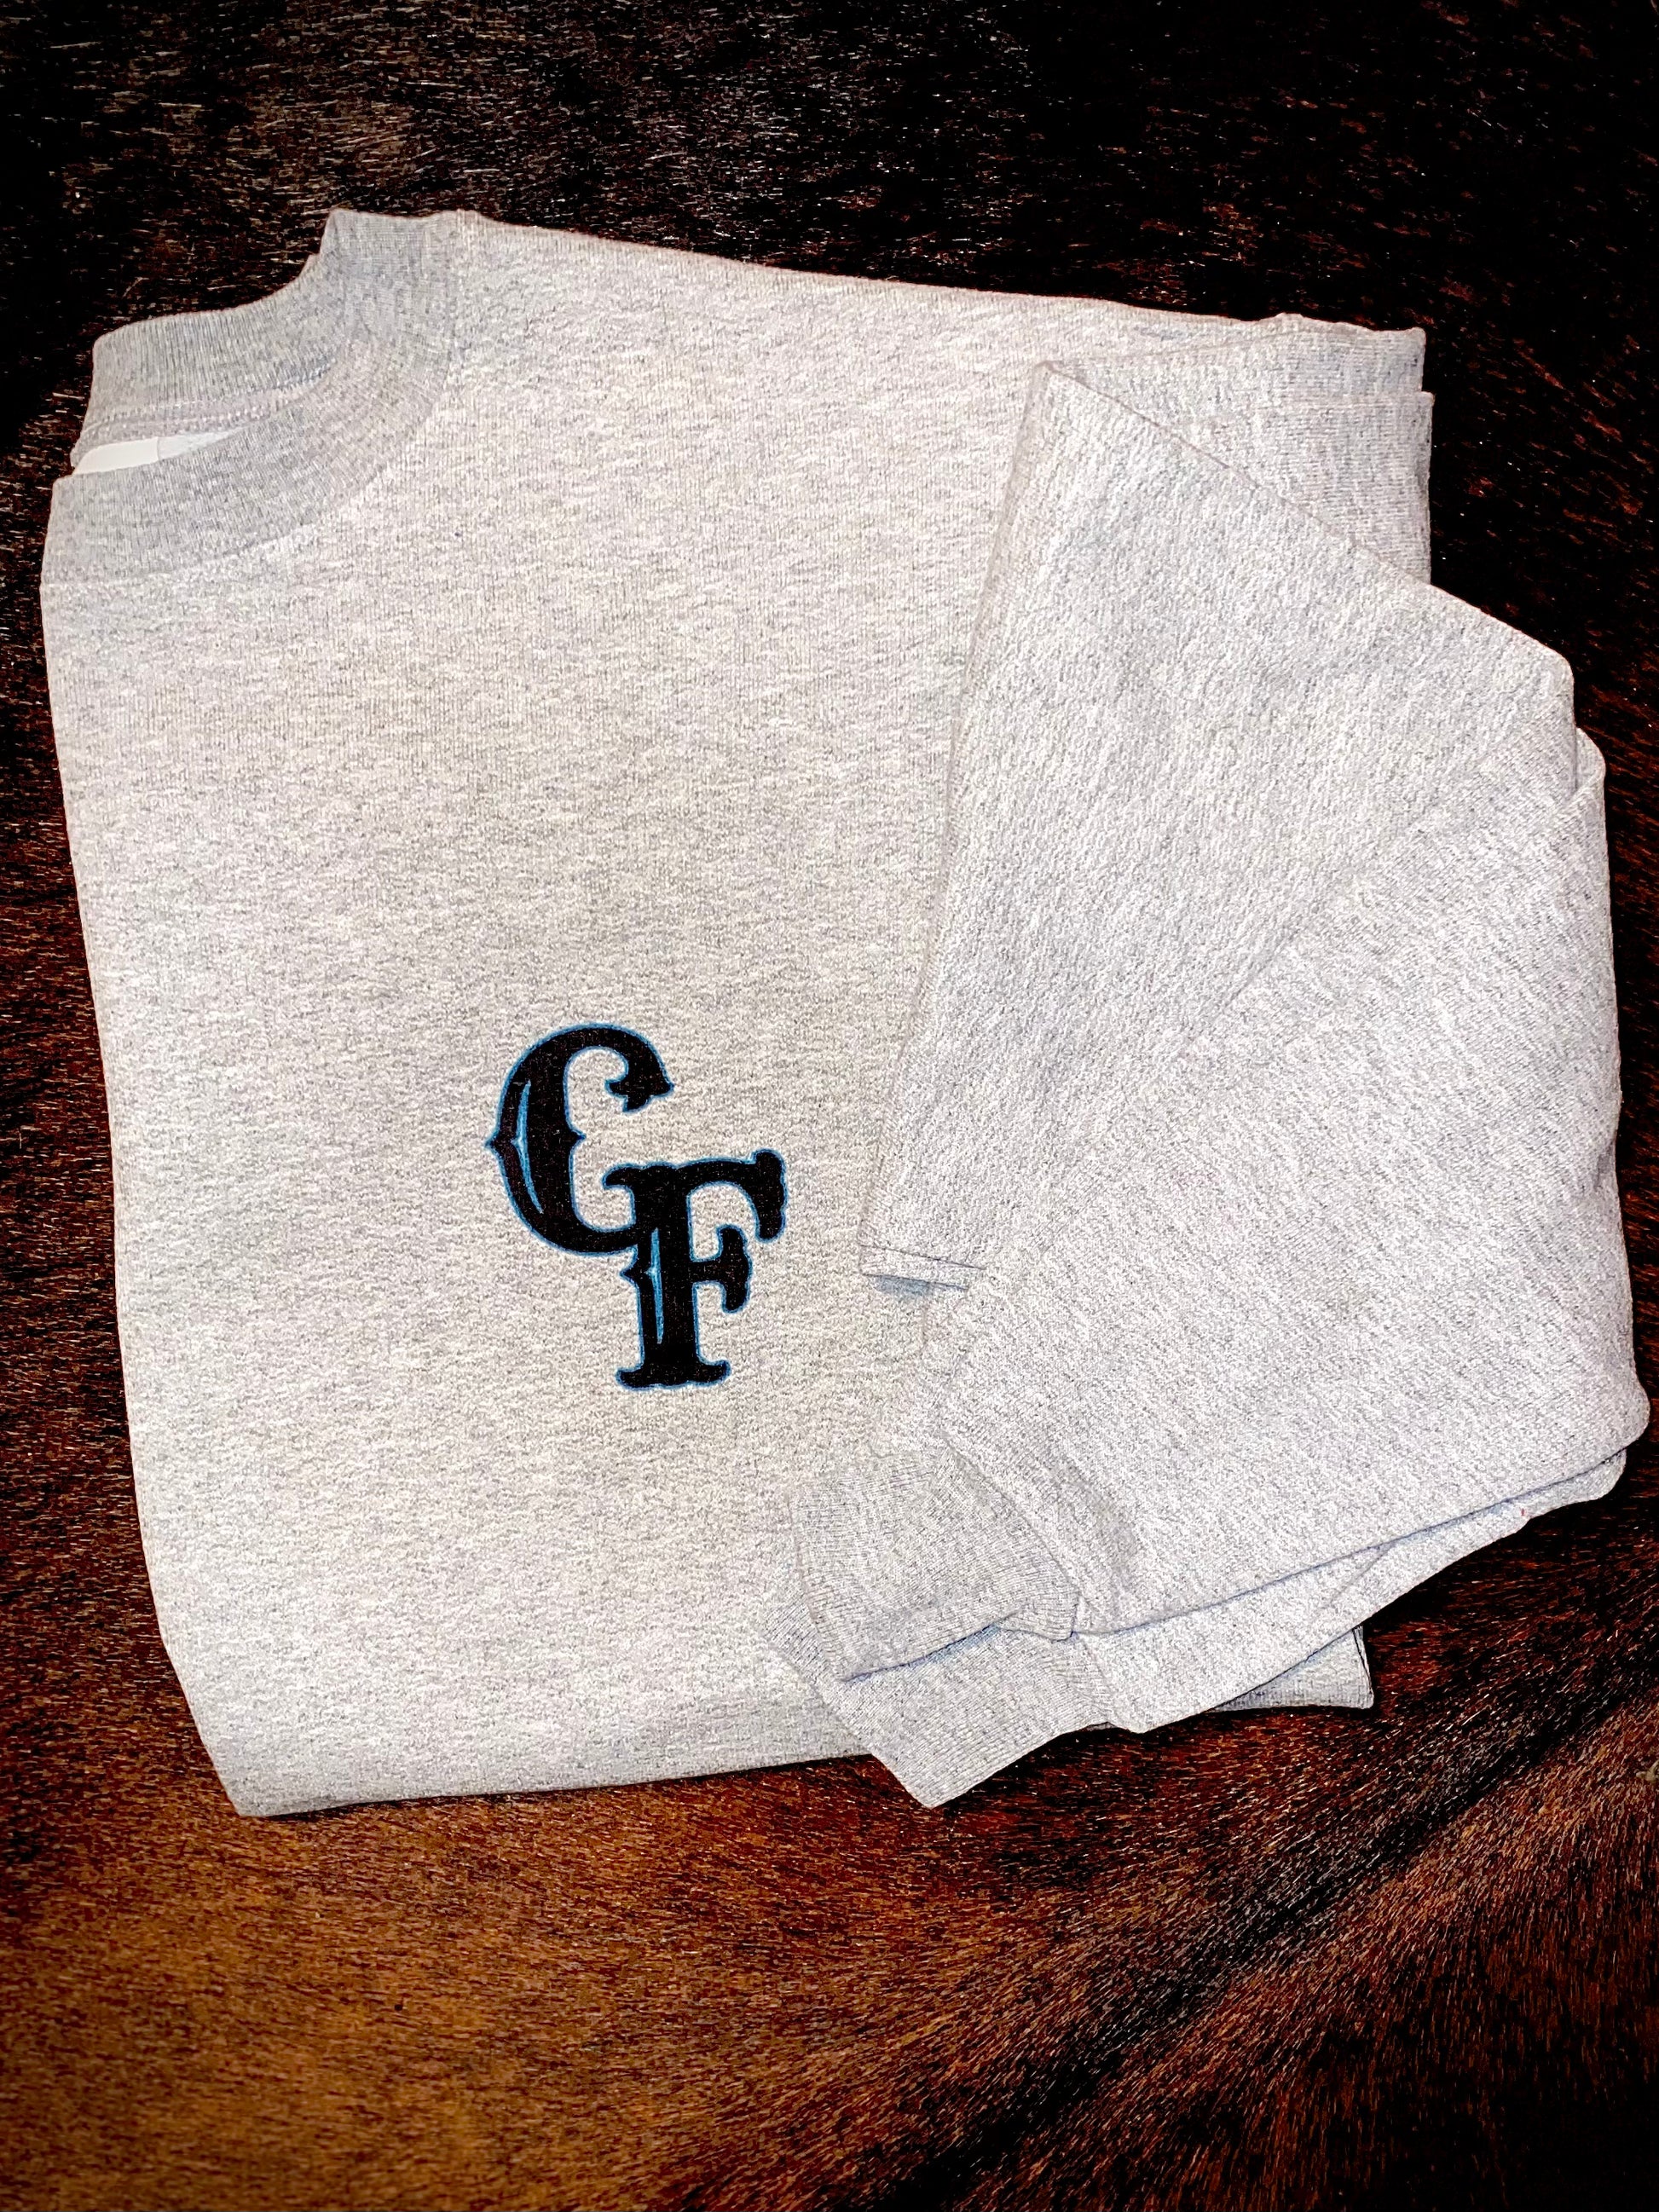 COUNTRYFIDE EXCLUSIVE SWEATSHIRT - CountryFide Custom Accessories and Outdoors